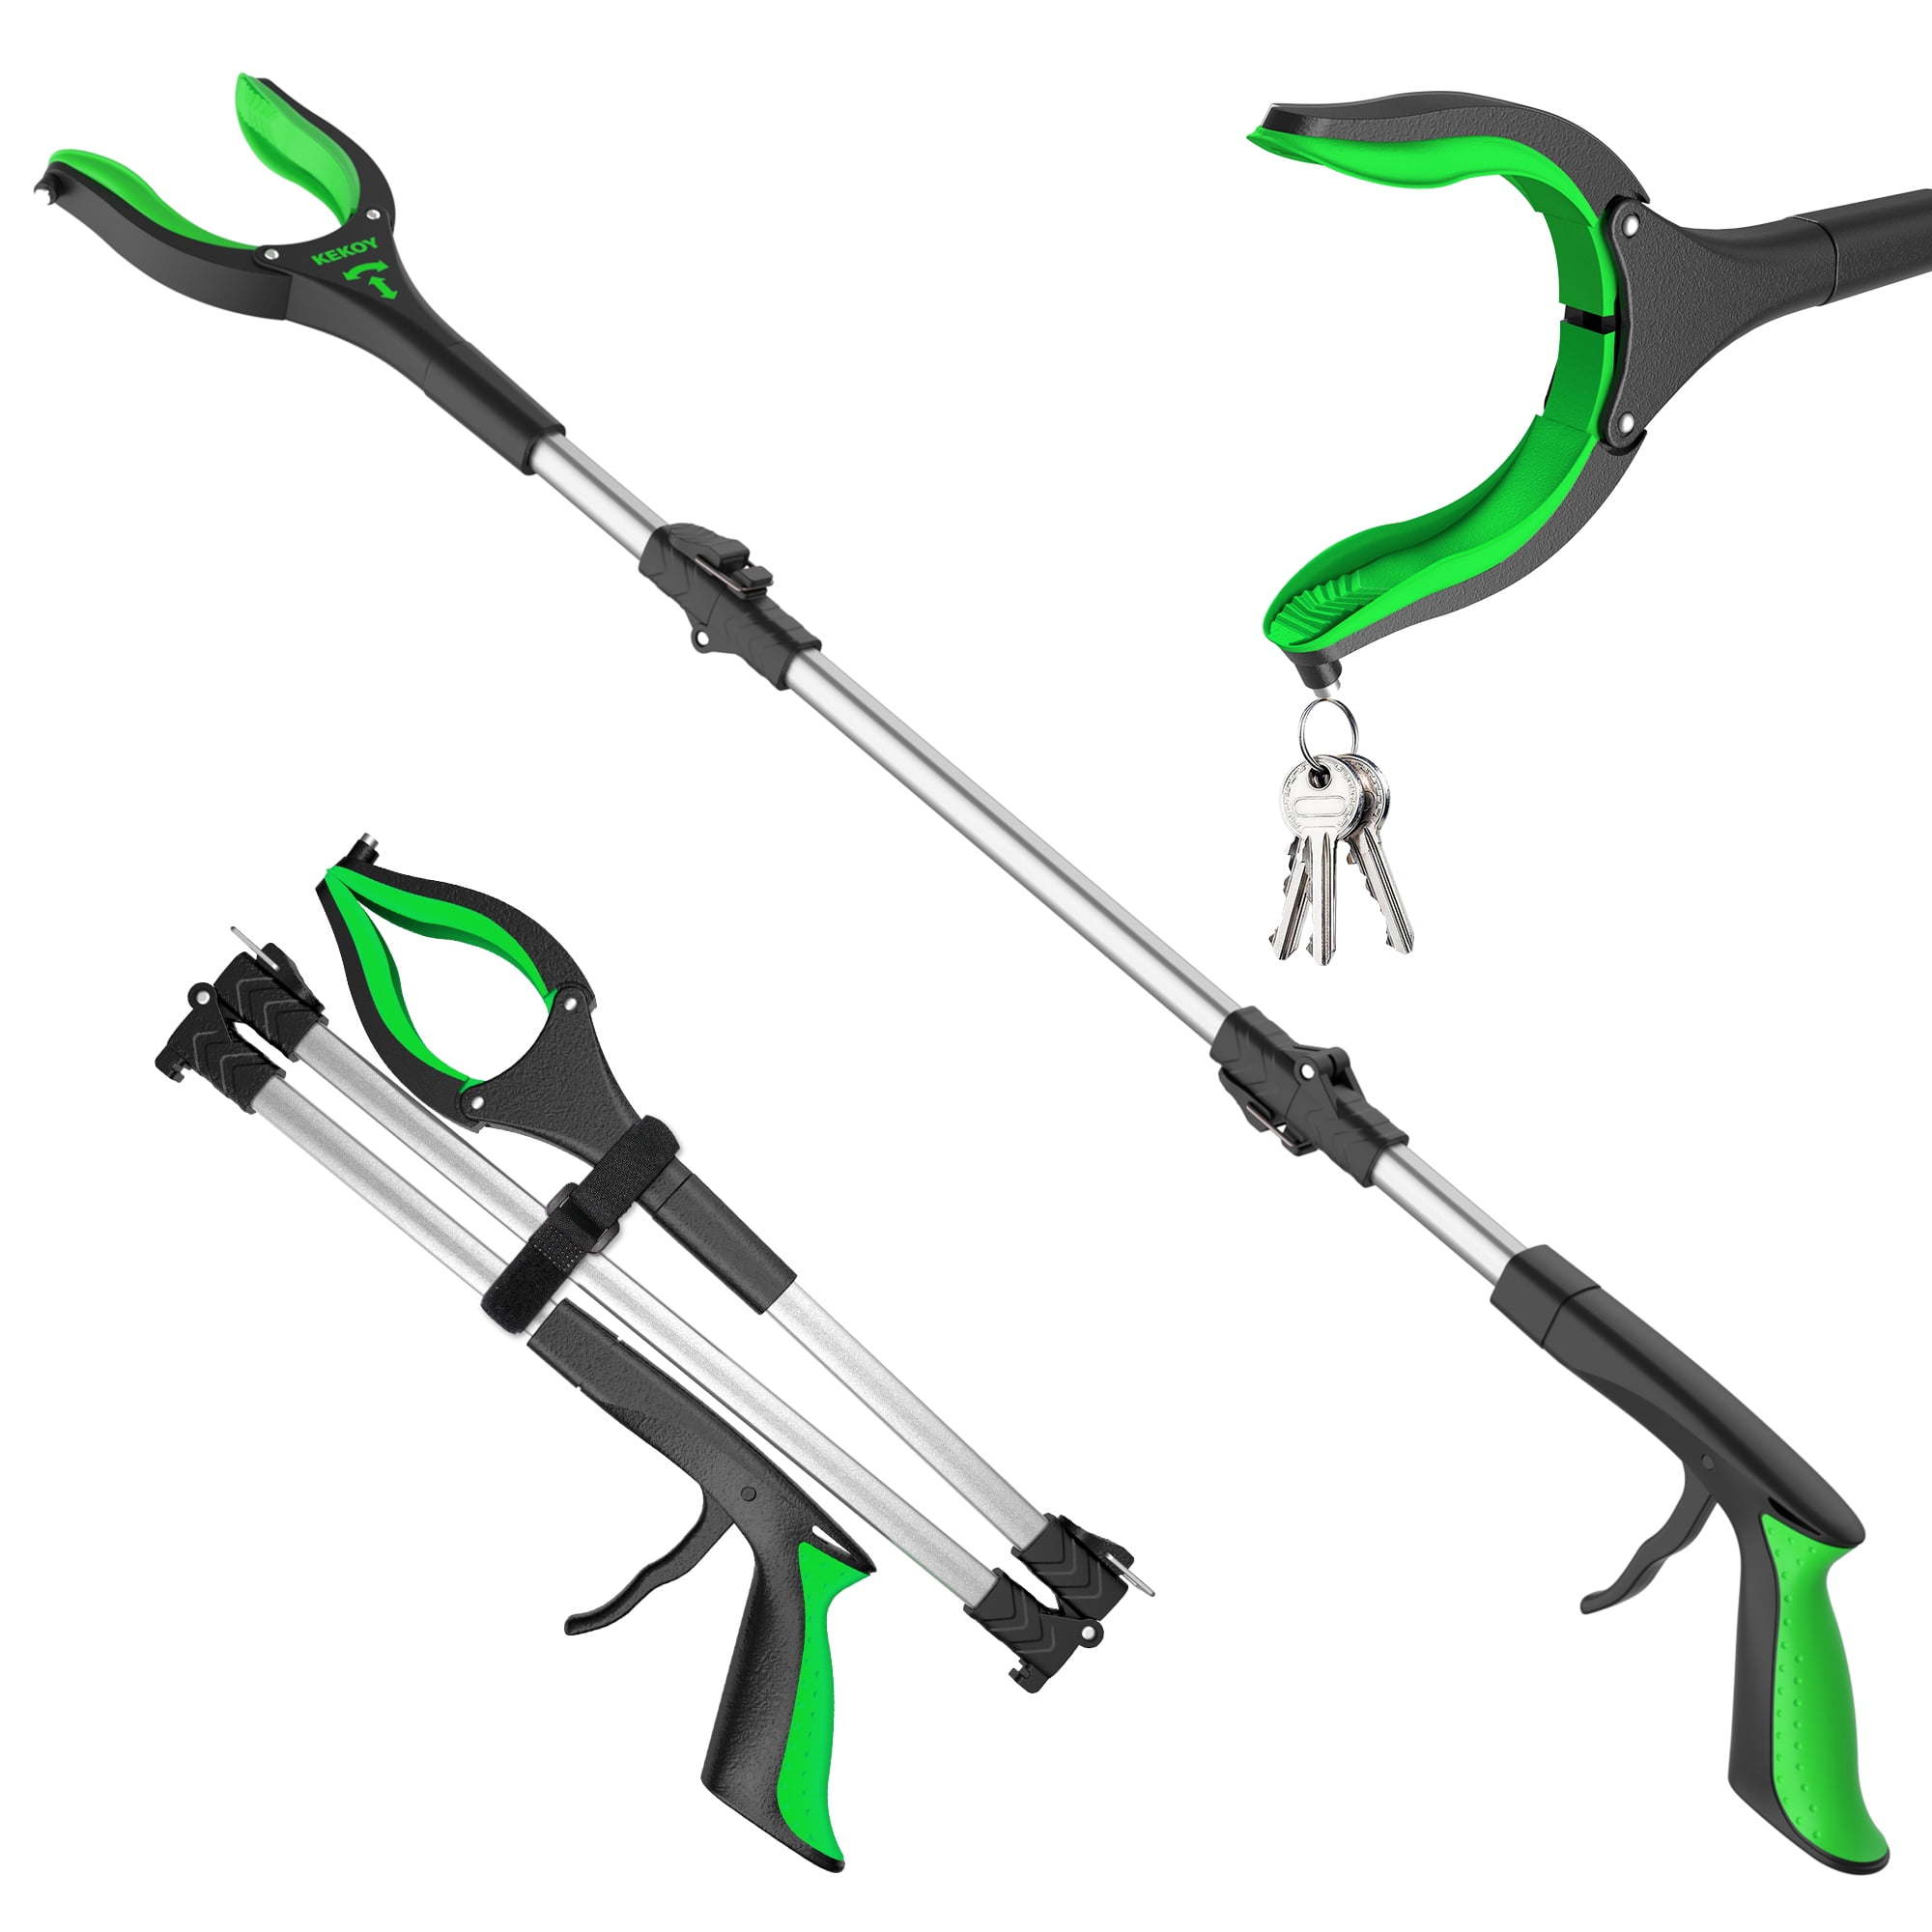 43 Extra Long Grabber Tool, Foldable Grabbers for Elderly Grab It Reaching  Tool with Rotating Jaw +Magnets, 4 Wide Claw Opening Reacher Grabber